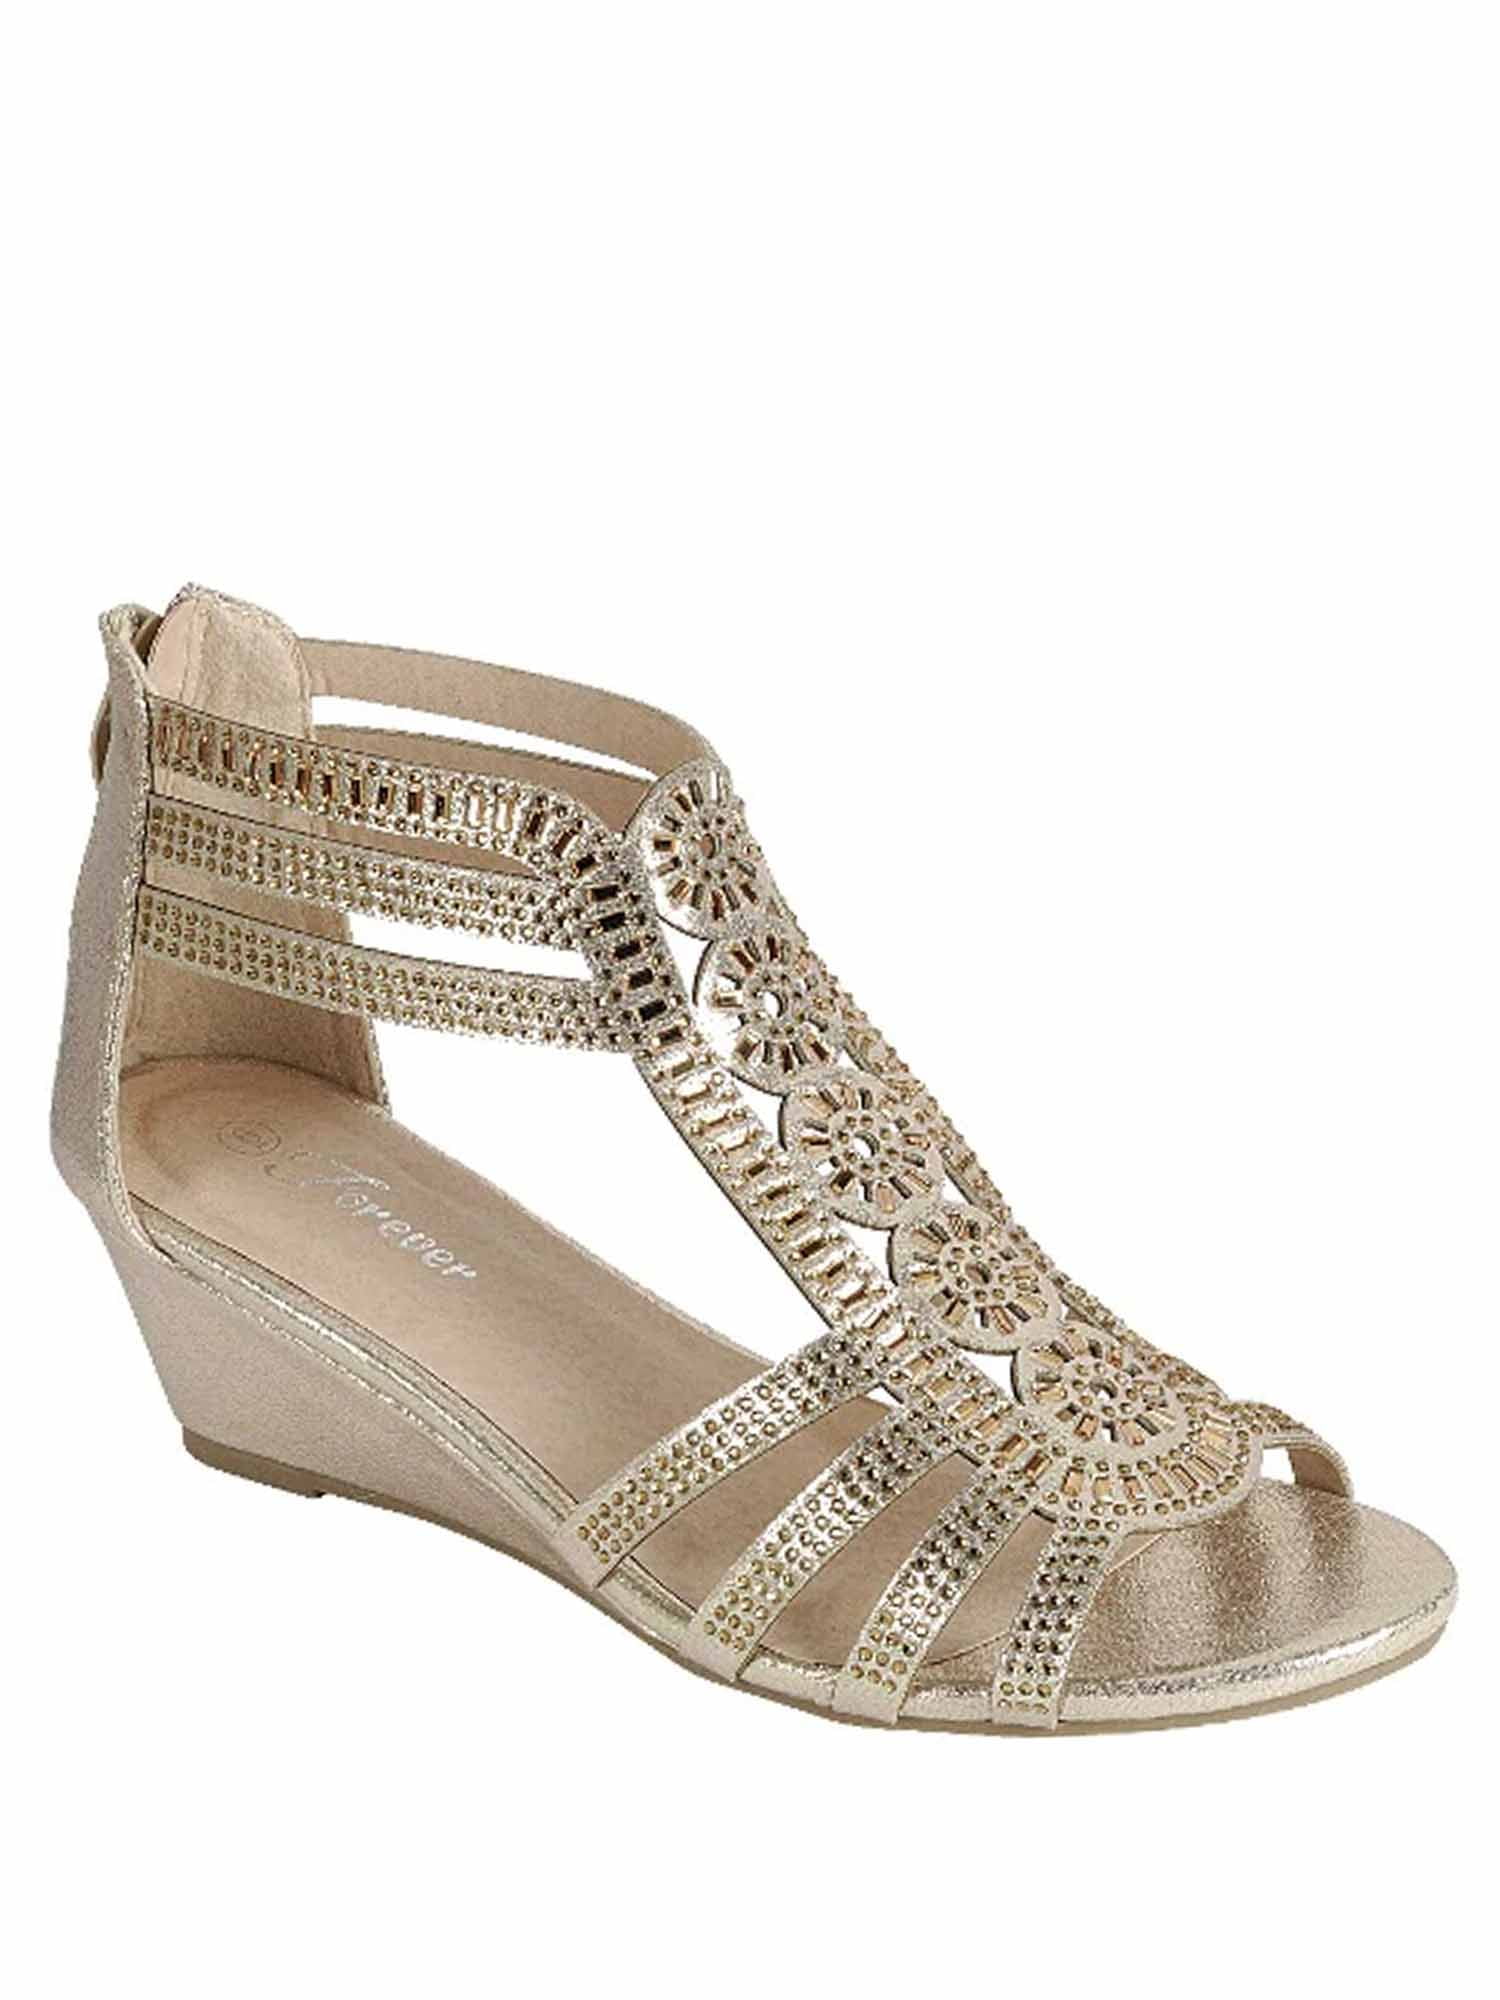 Ladies Rose Gold Champagne Low Wedge Heel Sparkly Diamante Sandal Holiday shoe 